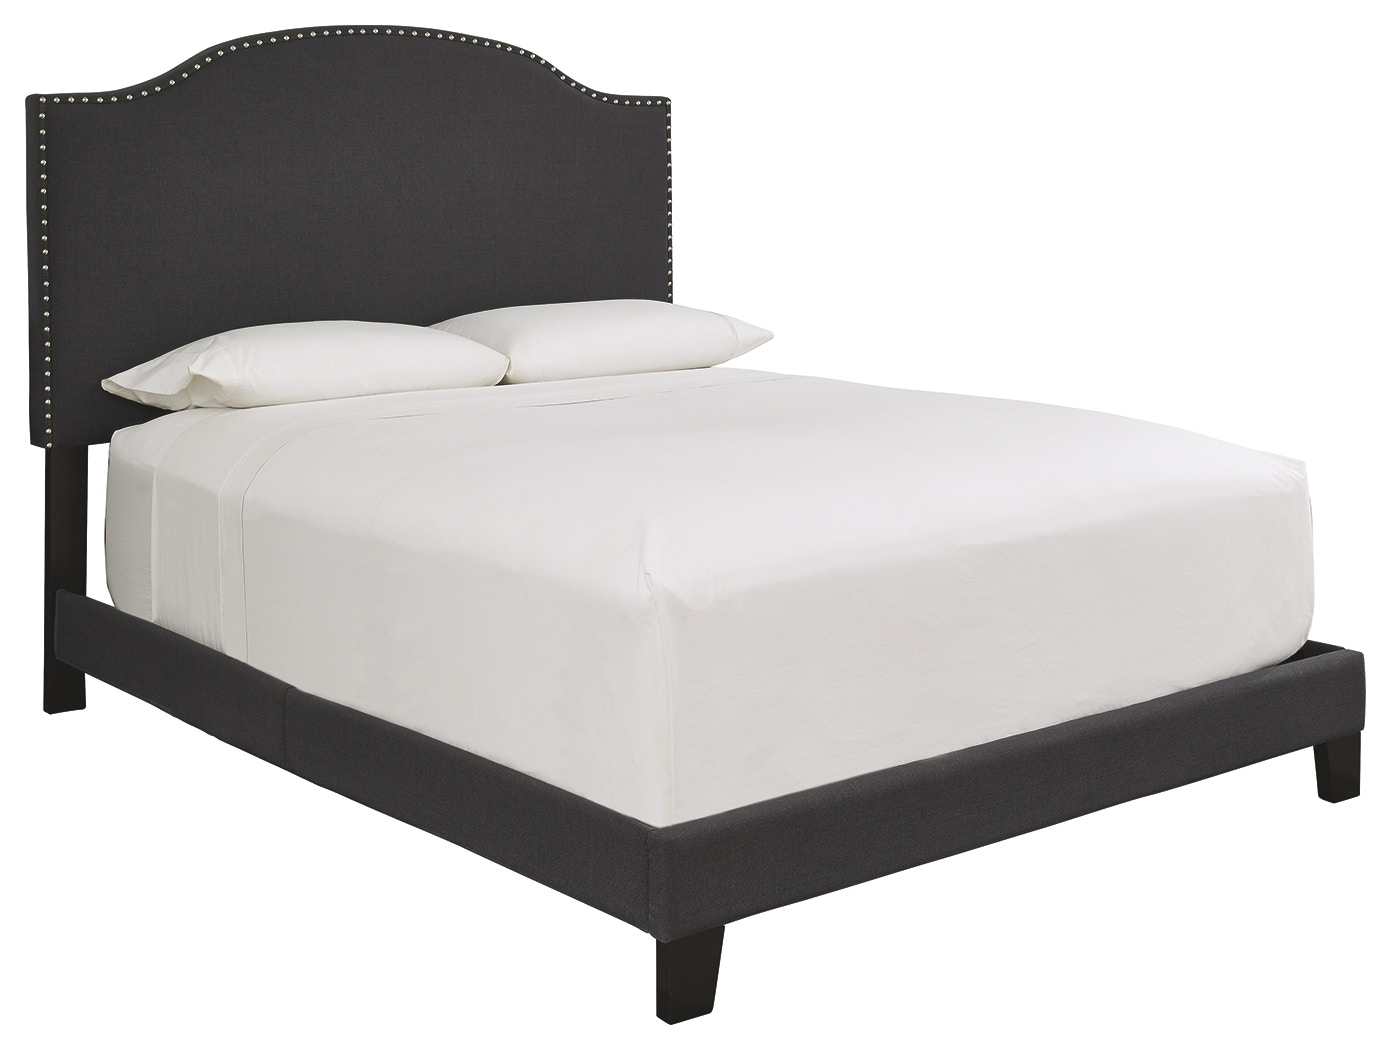 Signature Design by Ashley Bedroom Adelloni Queen Upholstered Bed 